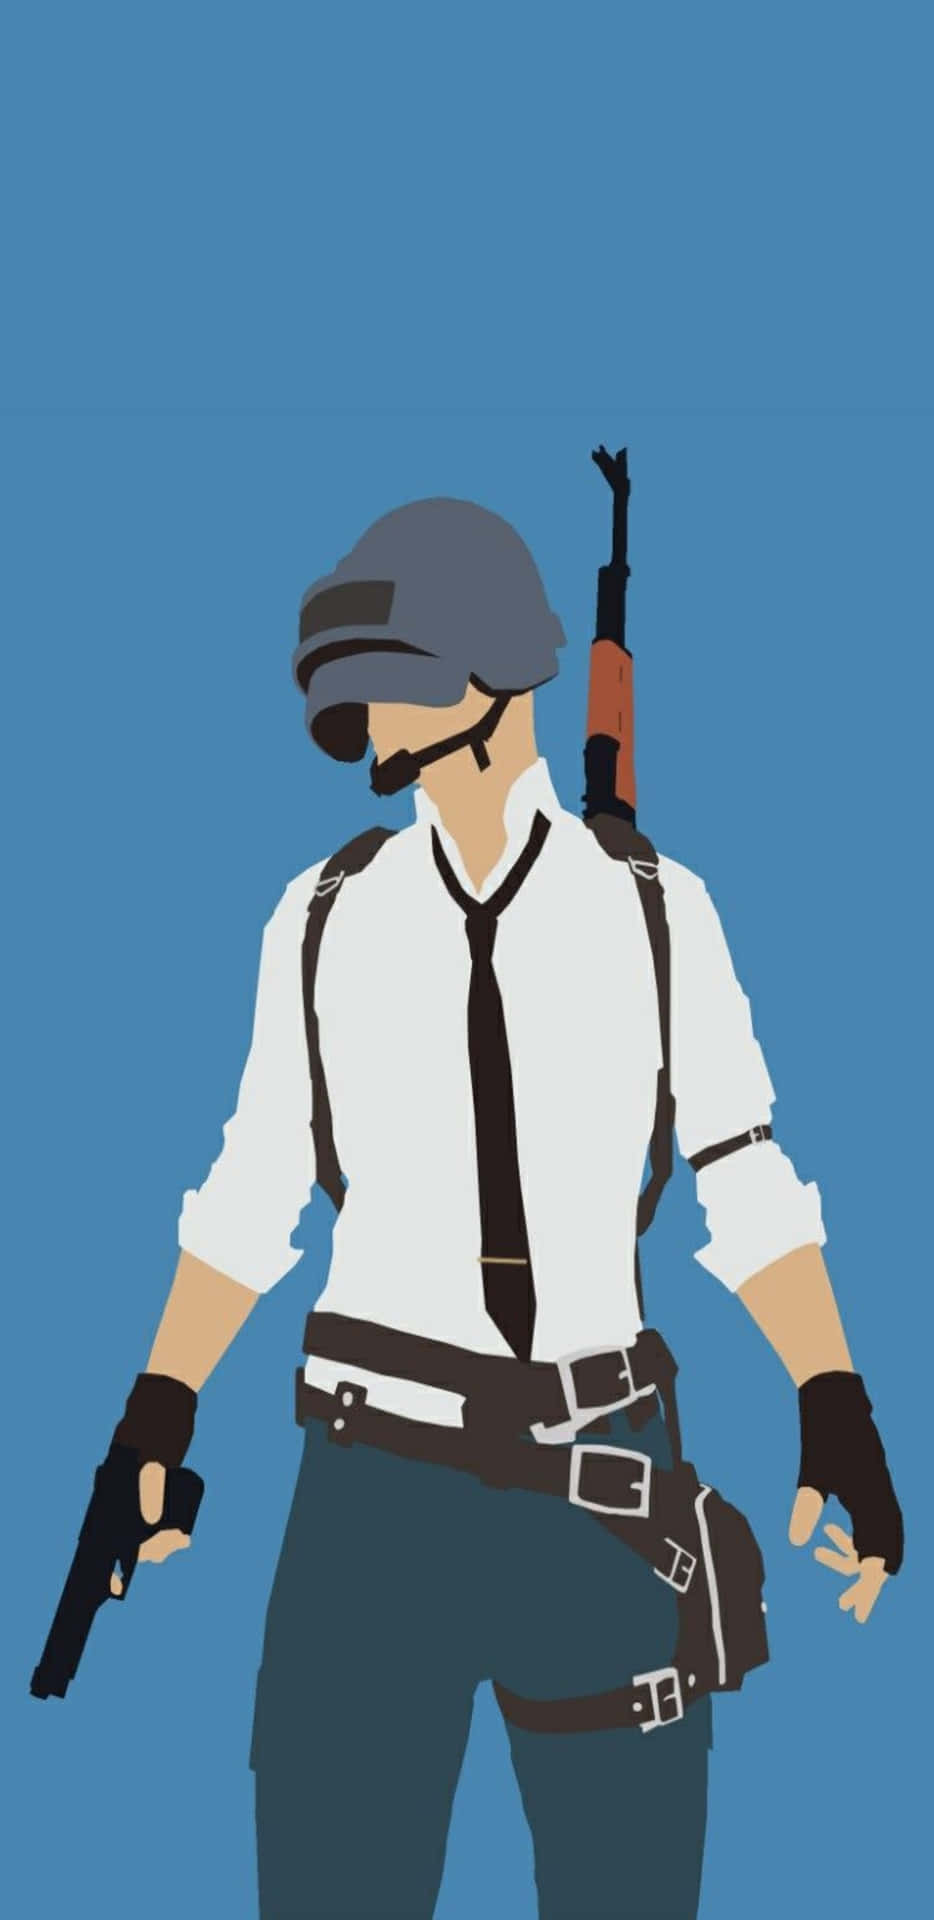 Pixel 3xl Playerunknown's Battlegrounds Background Painting Of An Armed Man